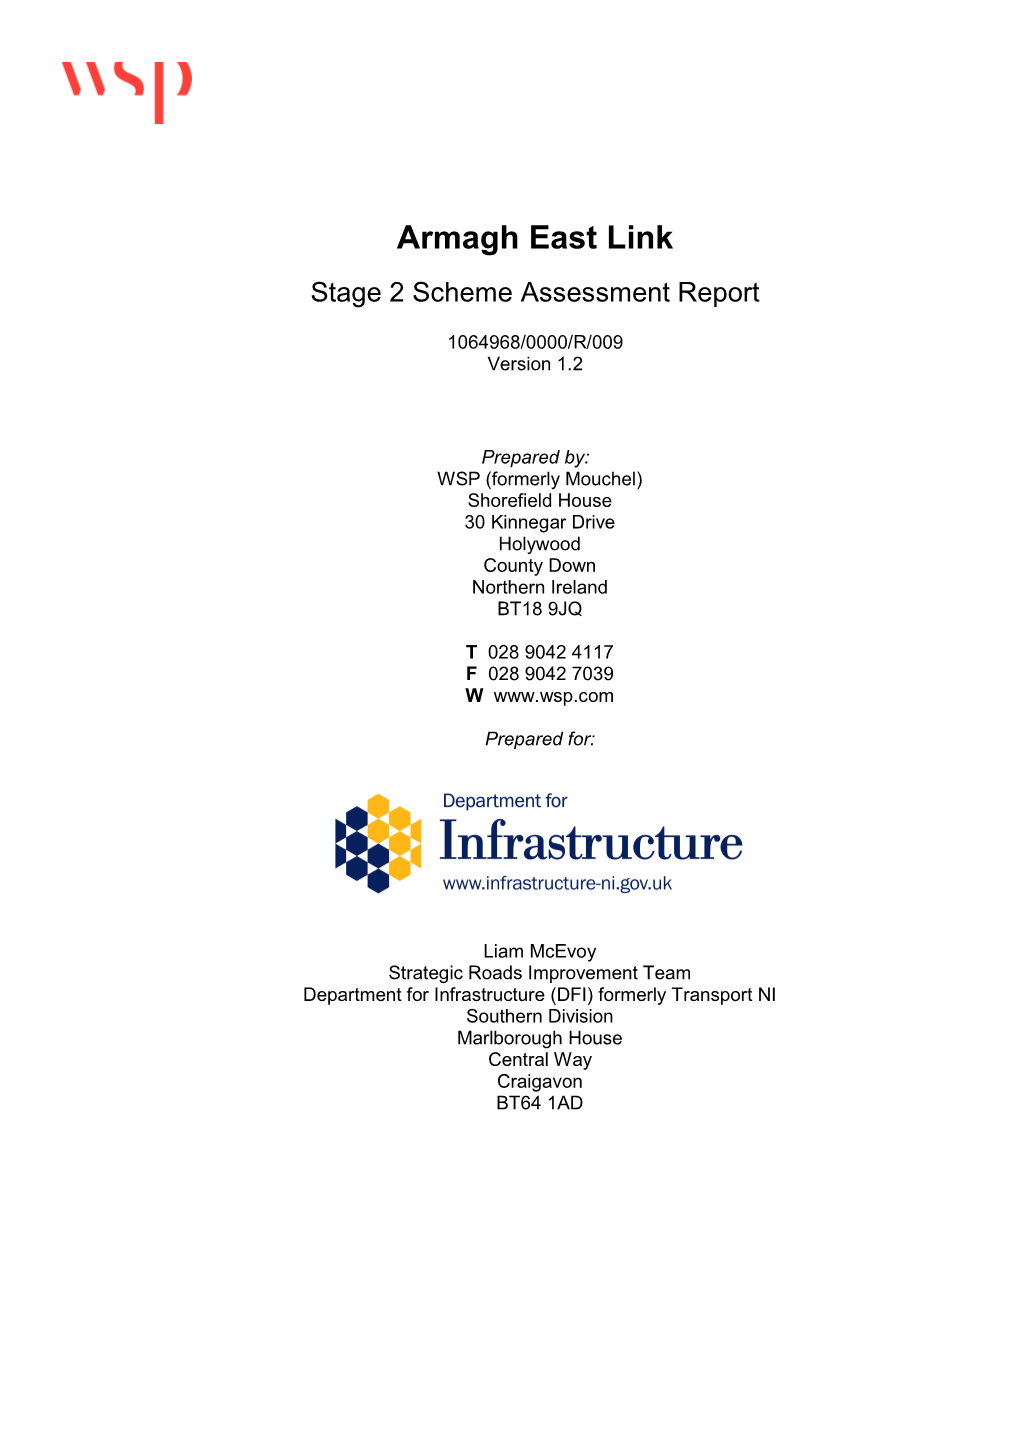 Armagh East Link Stage 2 Scheme Assessment Report